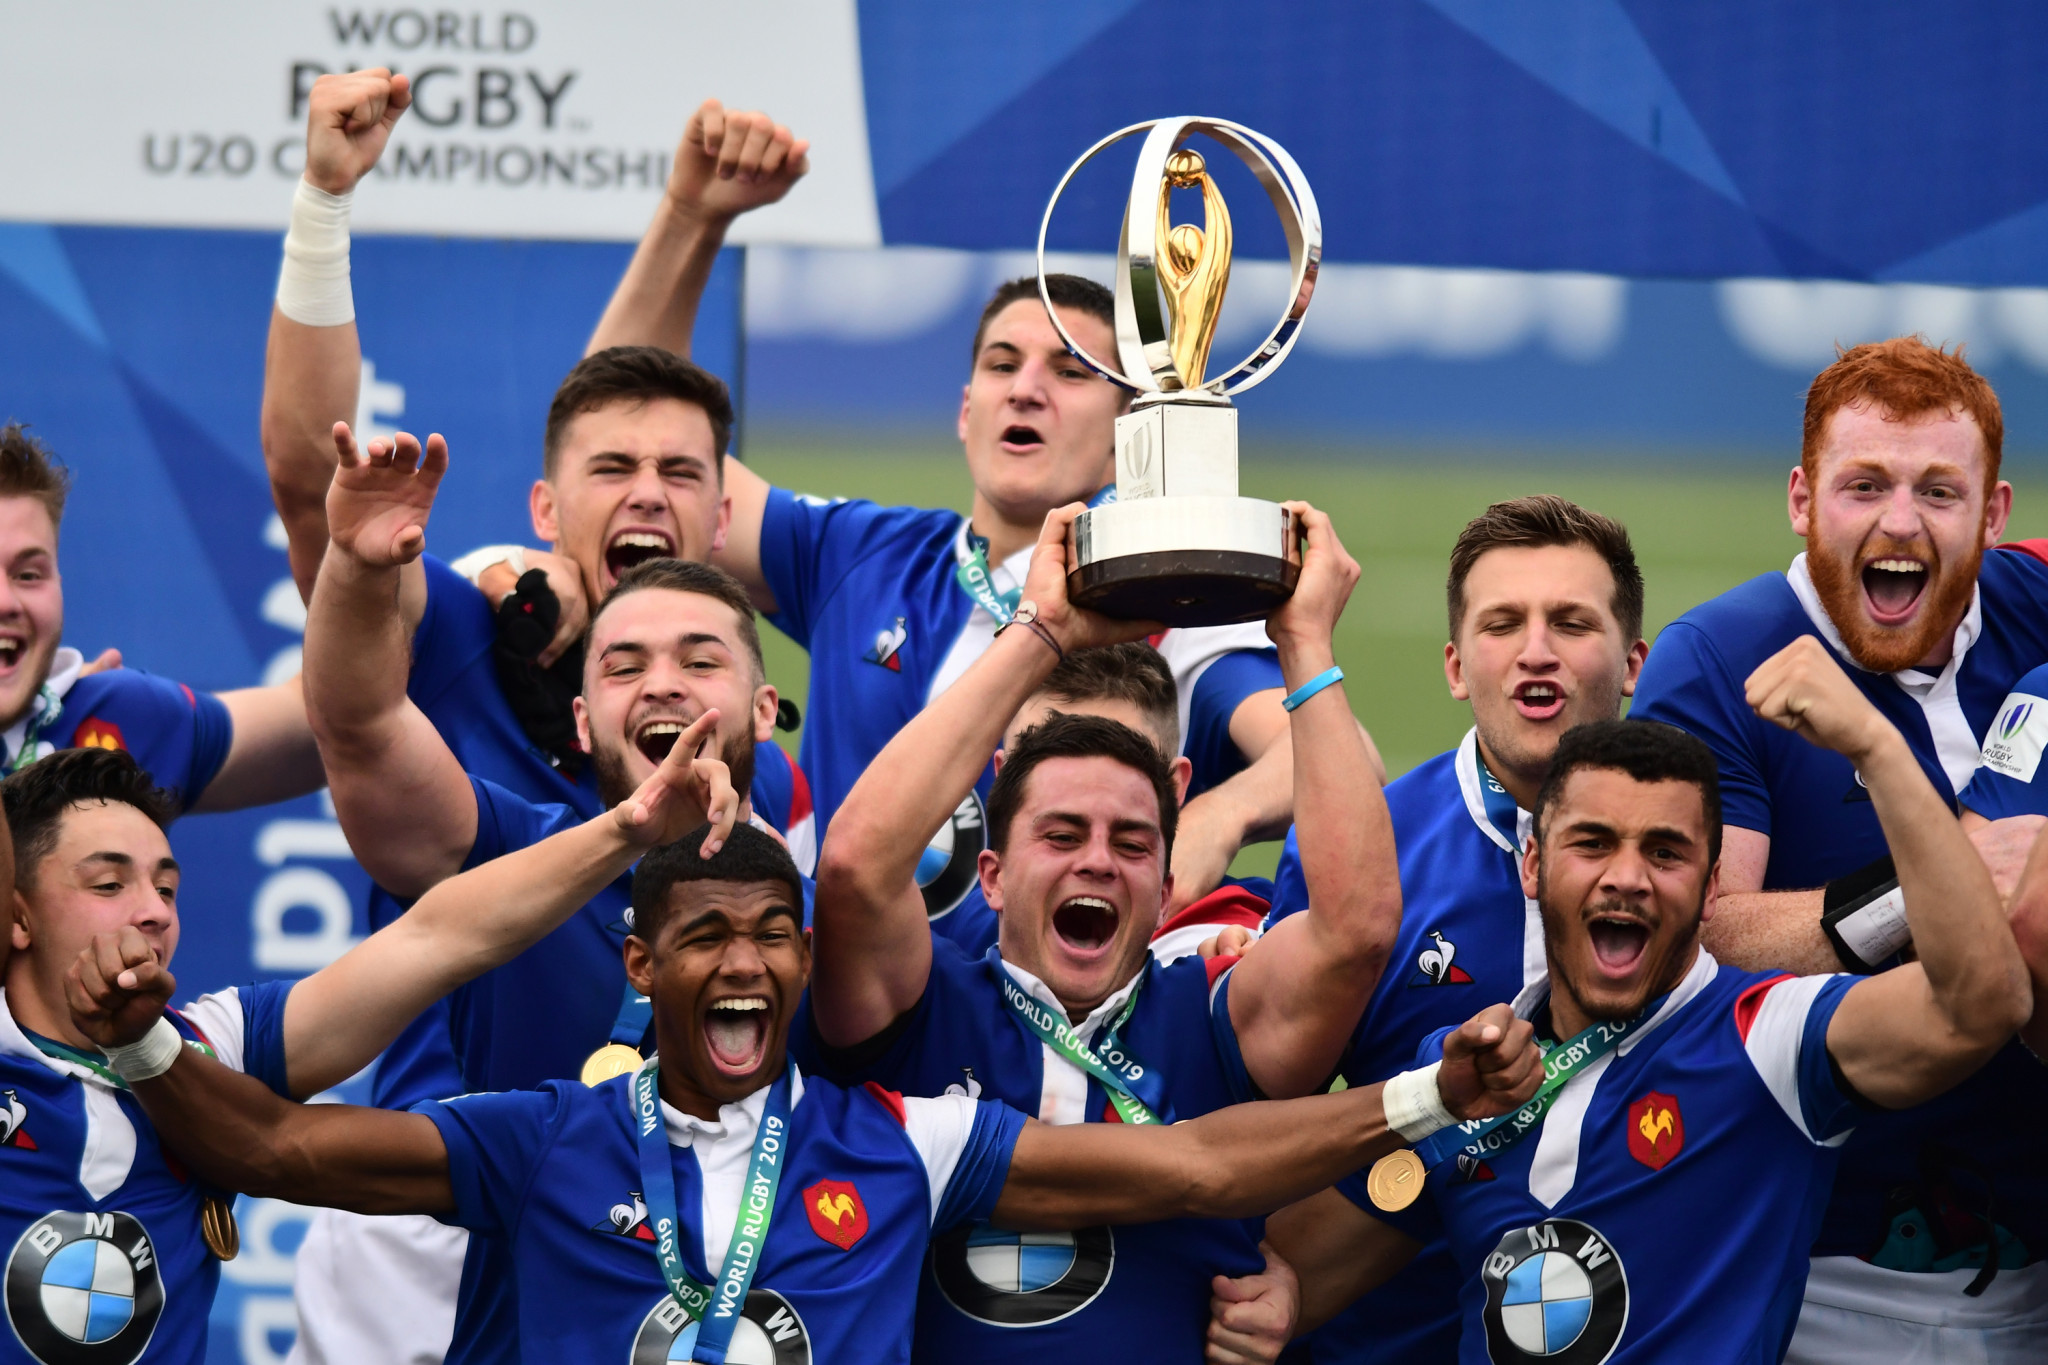 France are defending champions, having won the crown in Argentina last year ©Getty Images